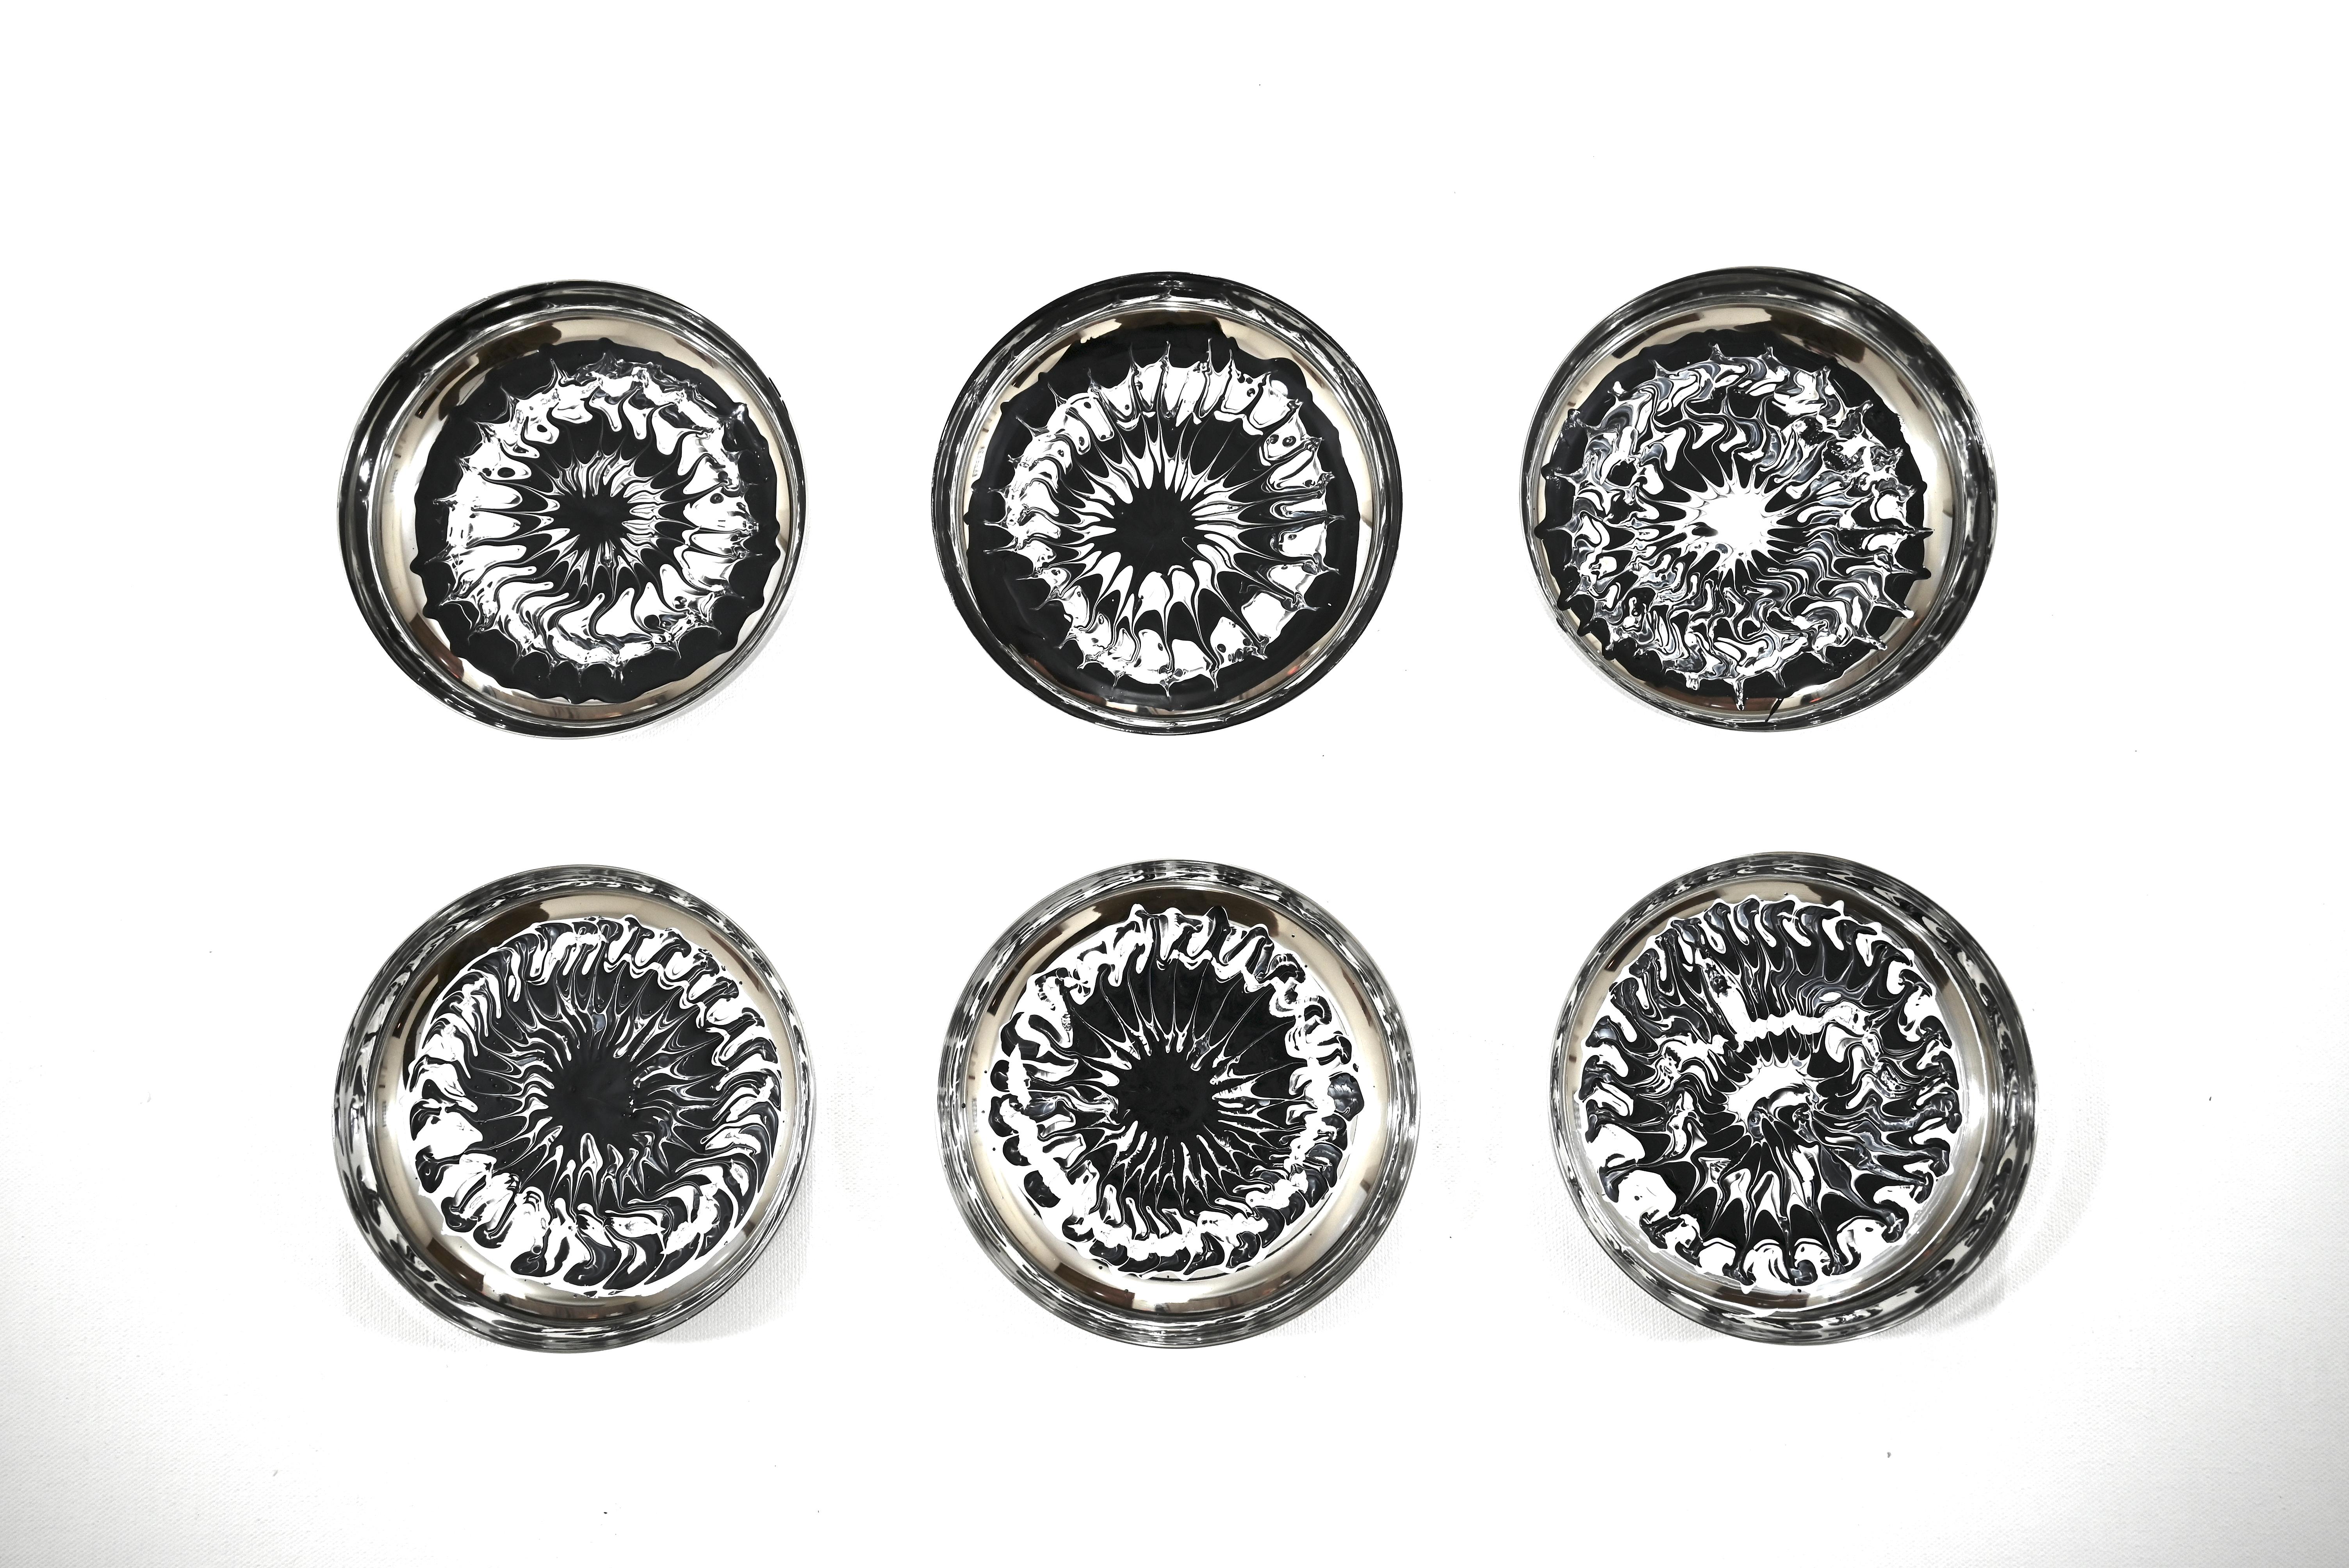 Six Stainless steel discs measuring 5.1x5.1x1.5 inches each (13x13x4 cms) hung individually on the wall with a 3M velcro tape hanging provision on the back of each disc, can be hung in any way as a set of six.

Sumit Mehndiratta is an Indian artist